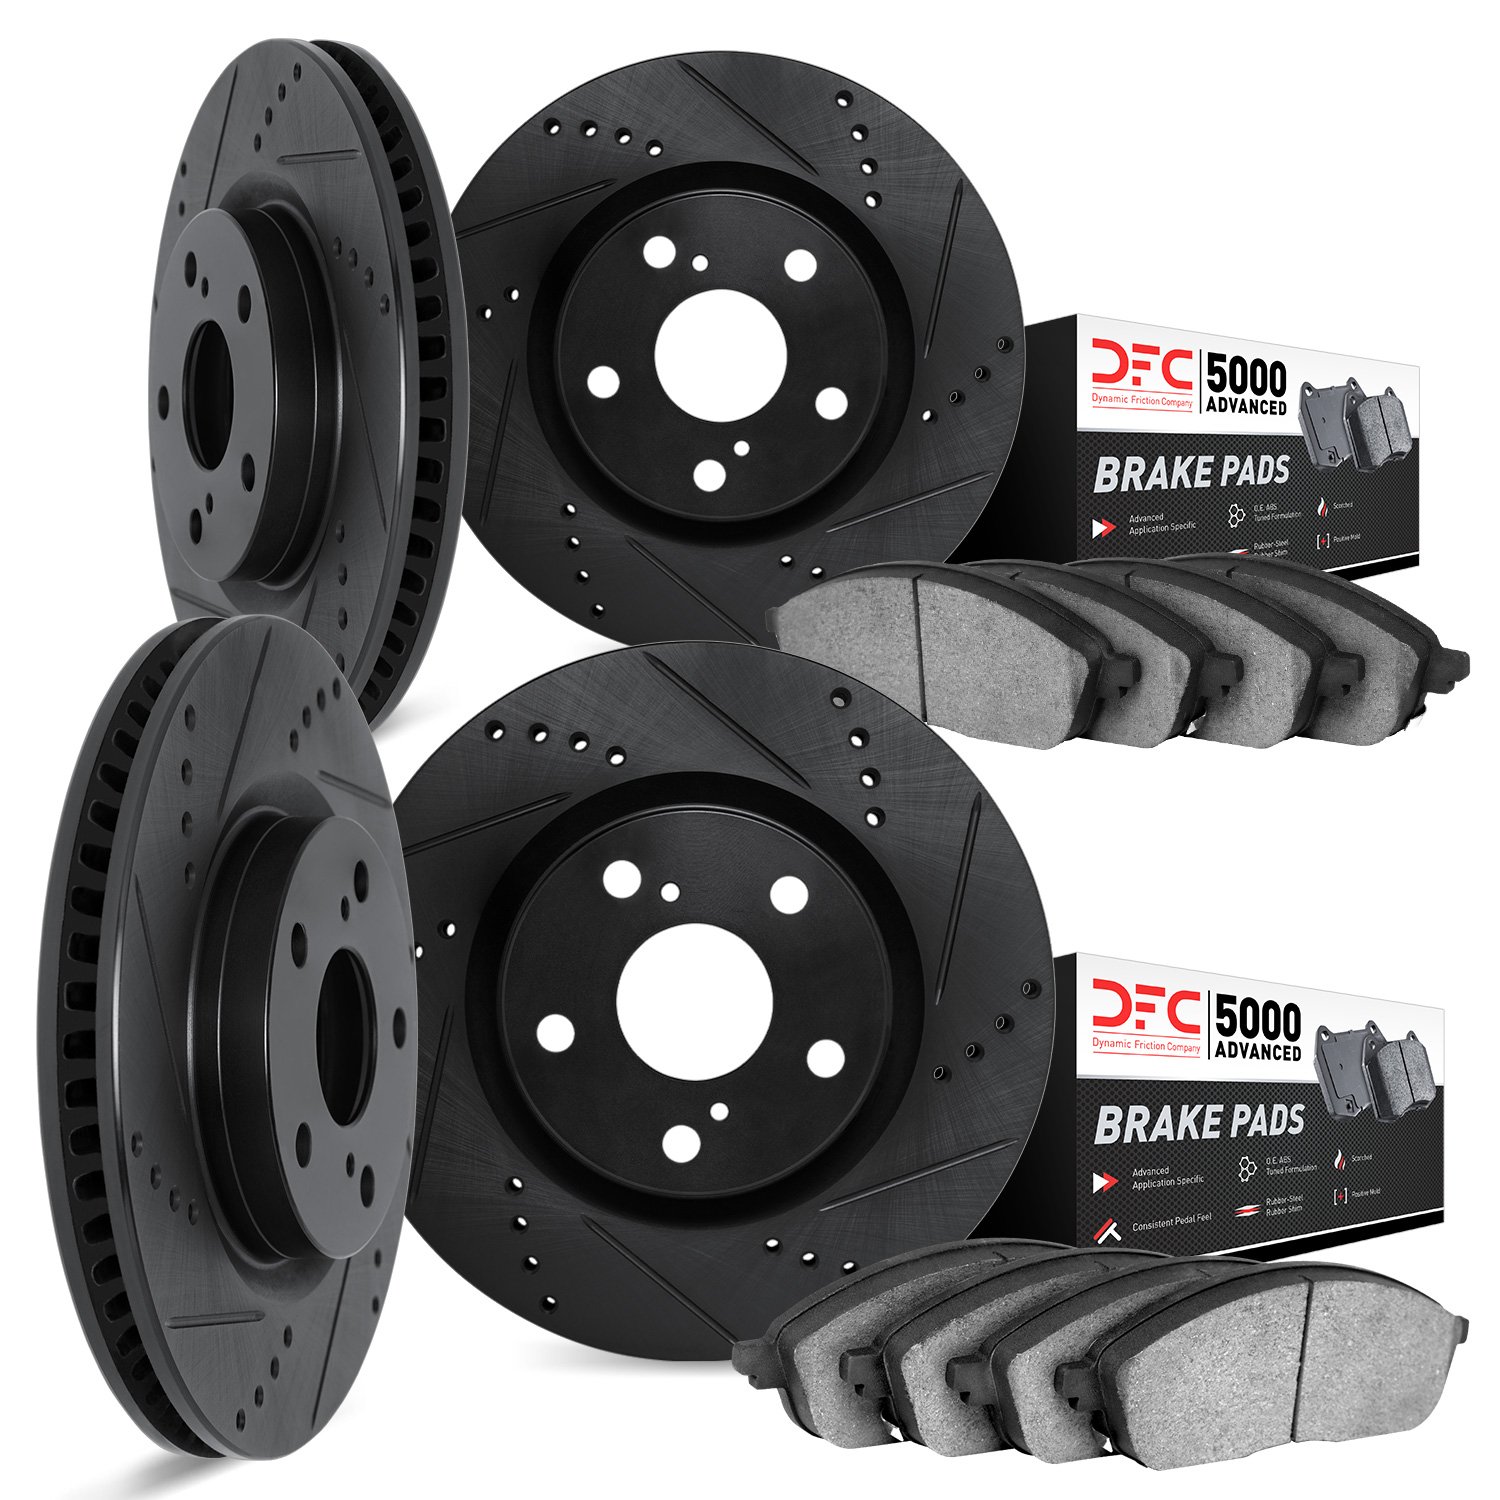 8504-47261 Drilled/Slotted Brake Rotors w/5000 Advanced Brake Pads Kit [Black], 2007-2015 GM, Position: Front and Rear